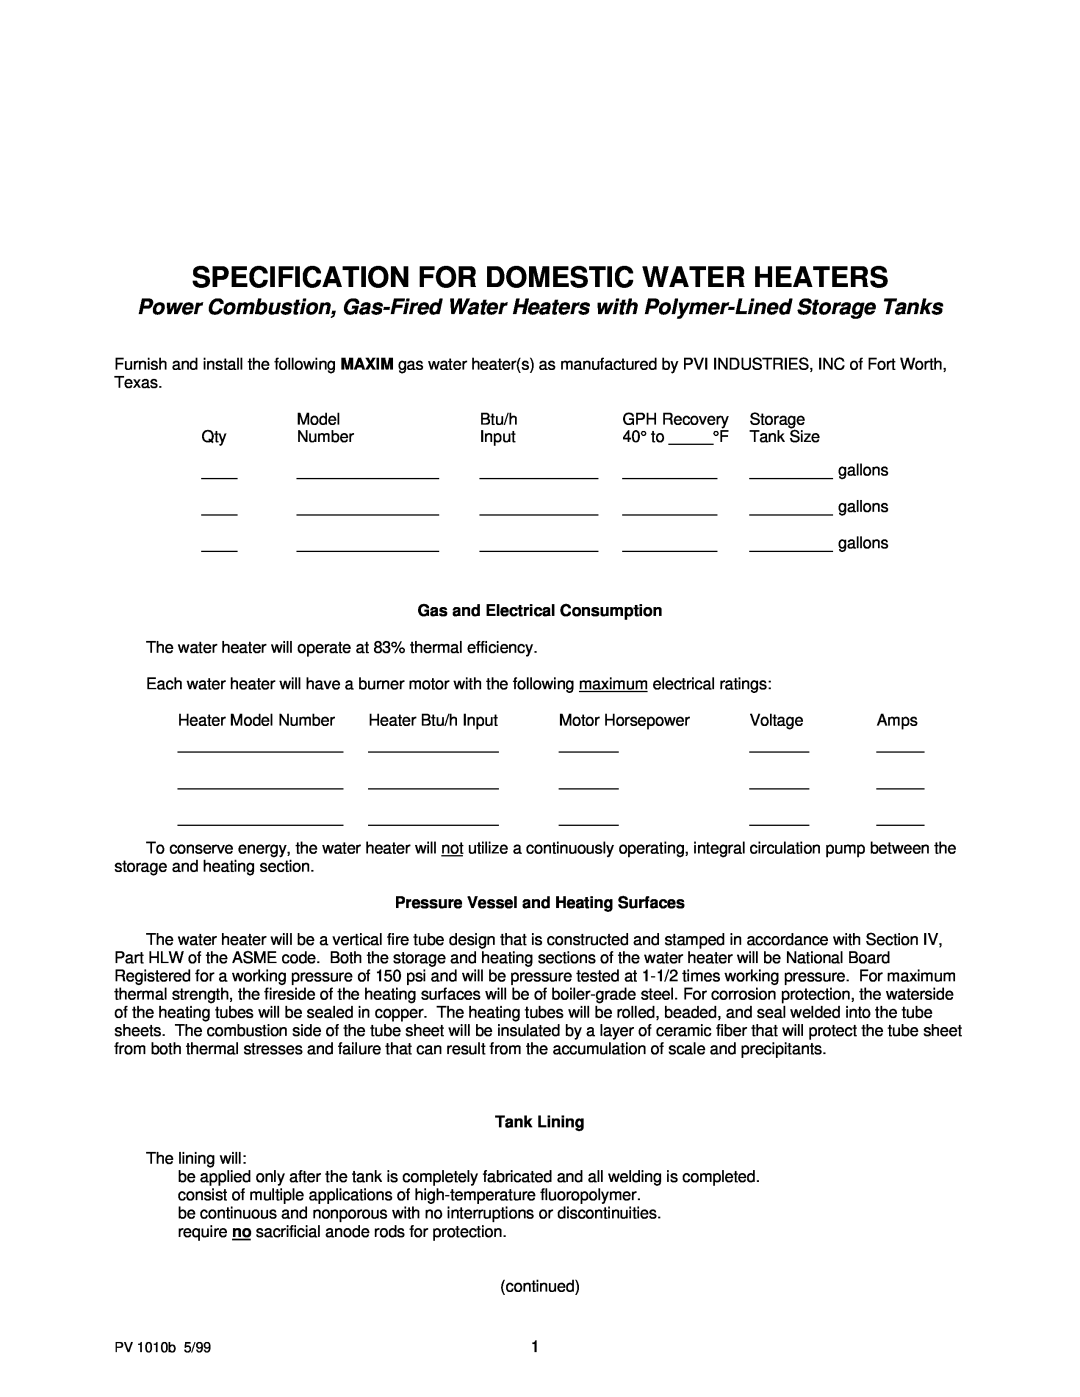 PVI Industries PV 1010b manual Specification For Domestic Water Heaters 